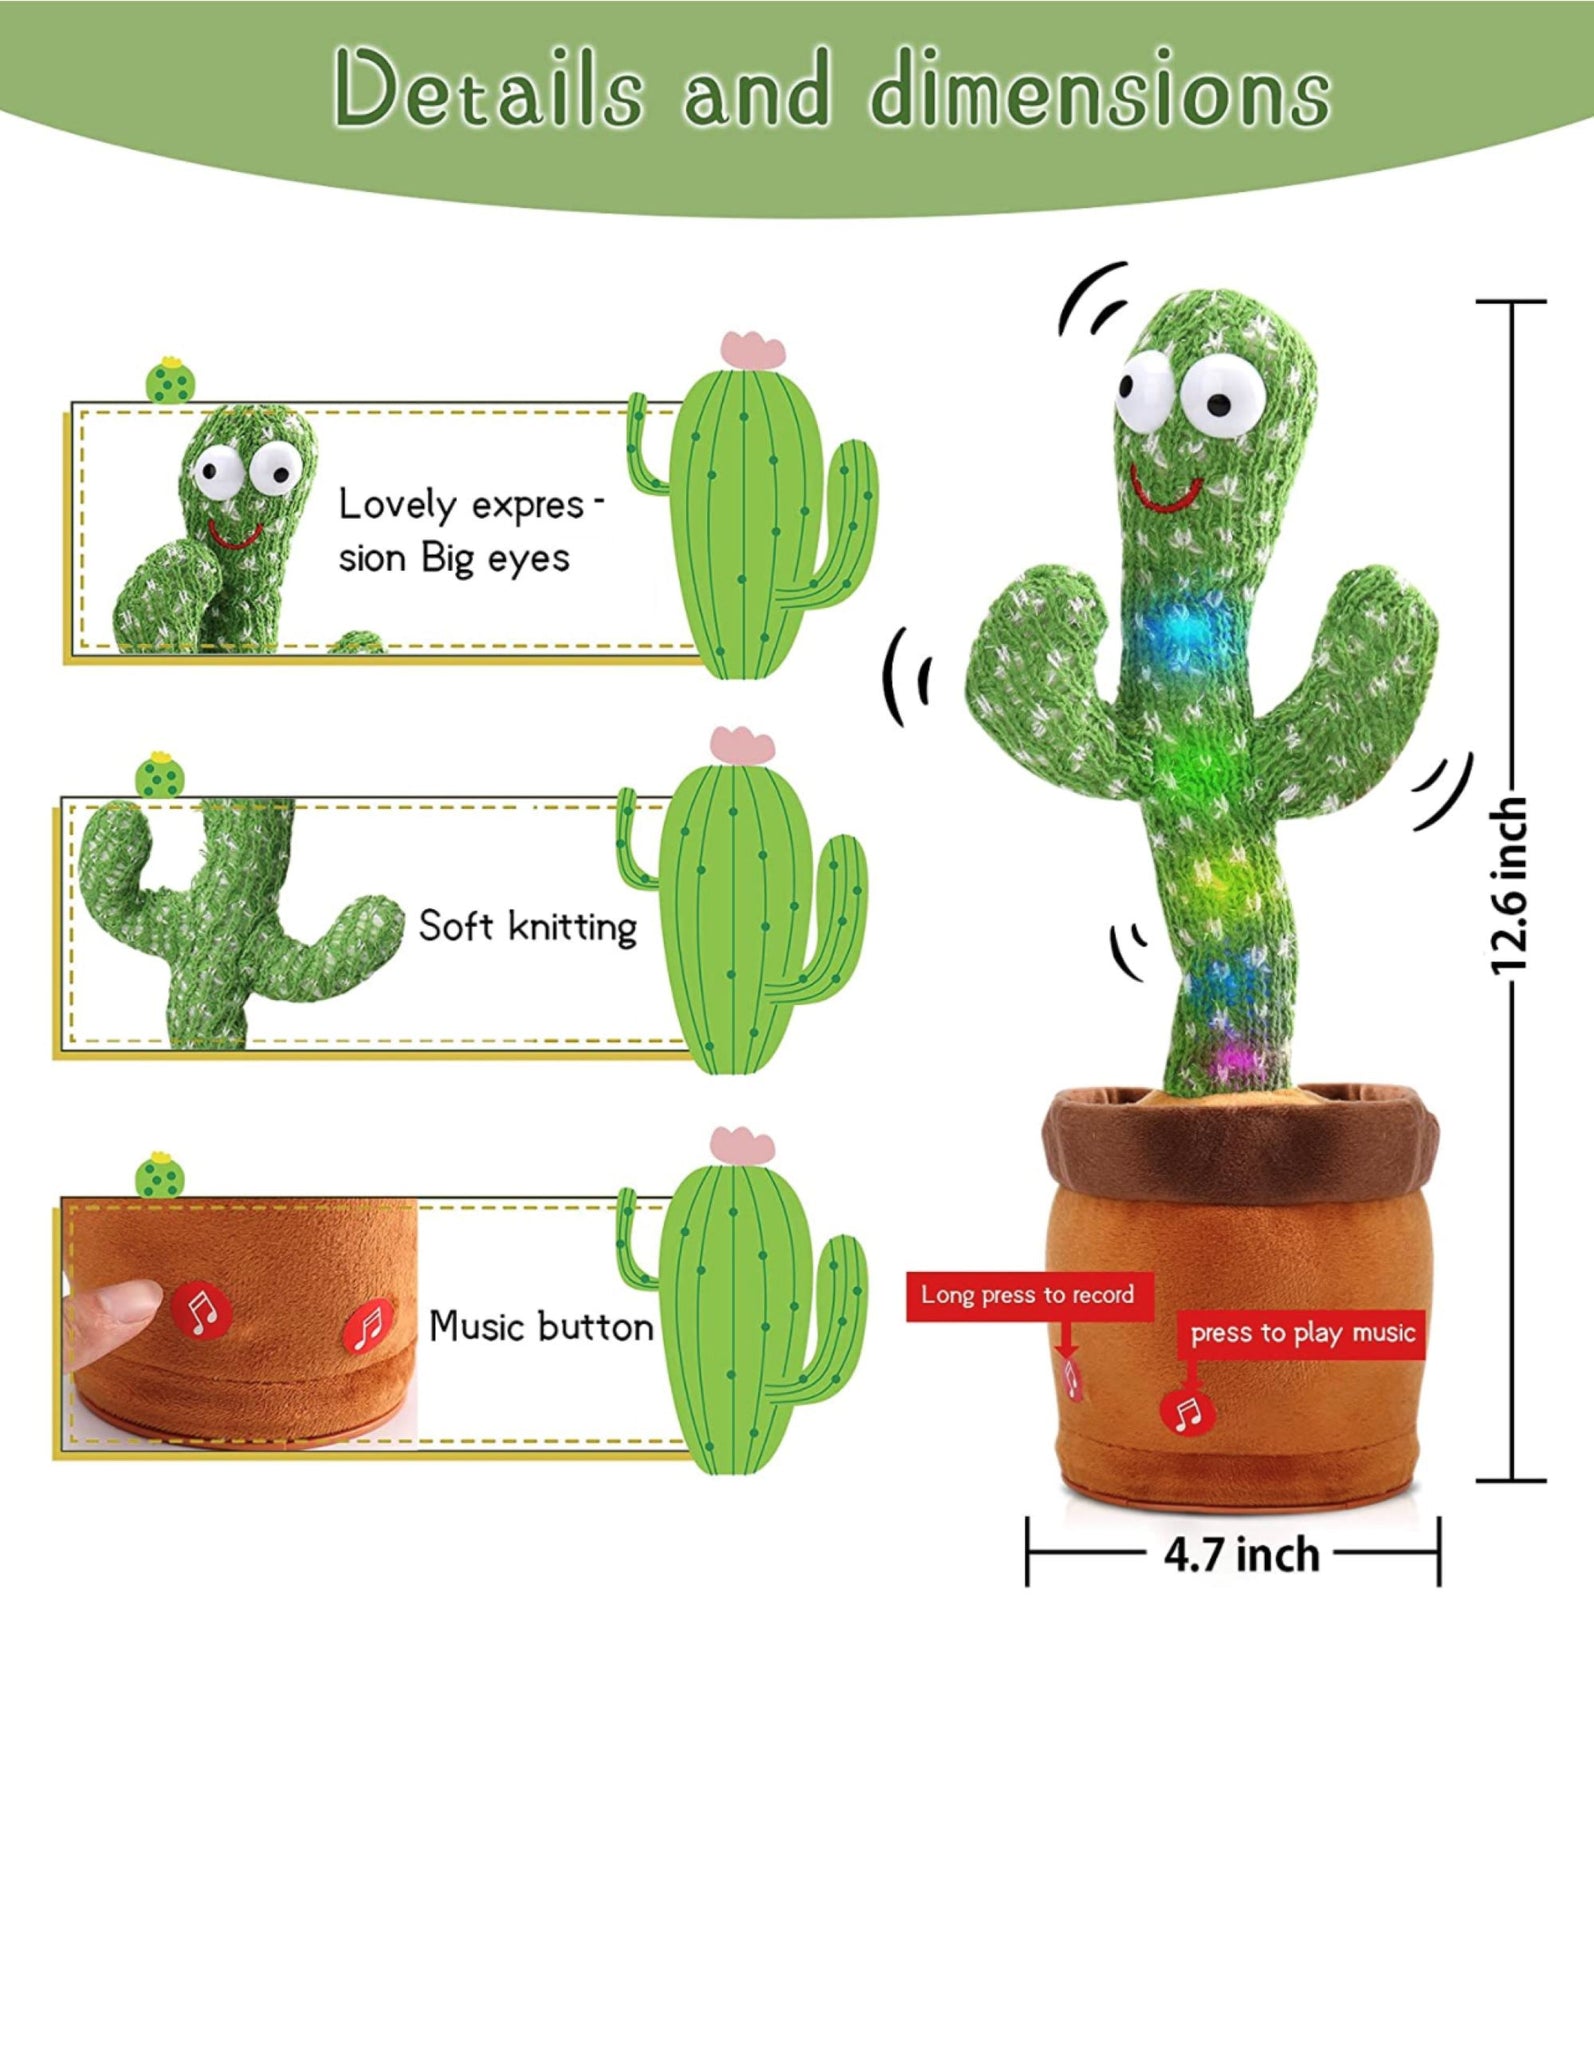 Dancing Cactus Toy Repeat What You Say USB Charging , Singing and Reco –  California Express Mall